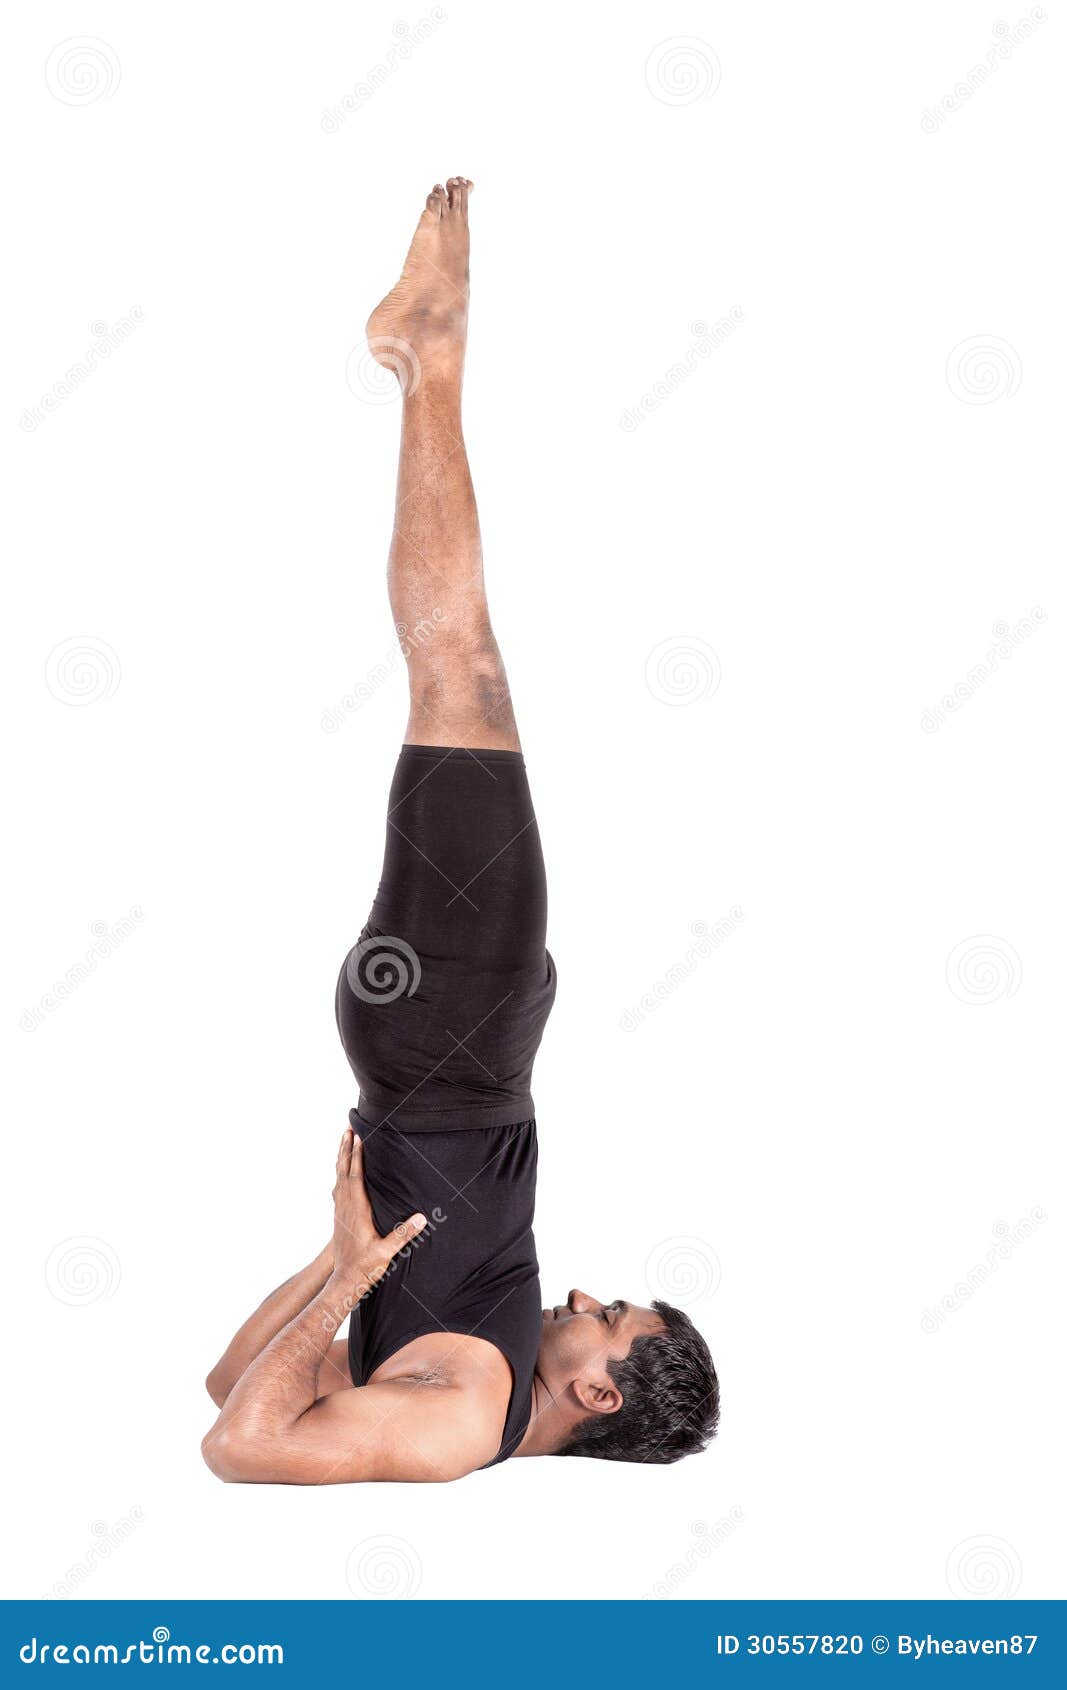 Shoulder Stand Yoga: Over 519 Royalty-Free Licensable Stock Illustrations &  Drawings | Shutterstock